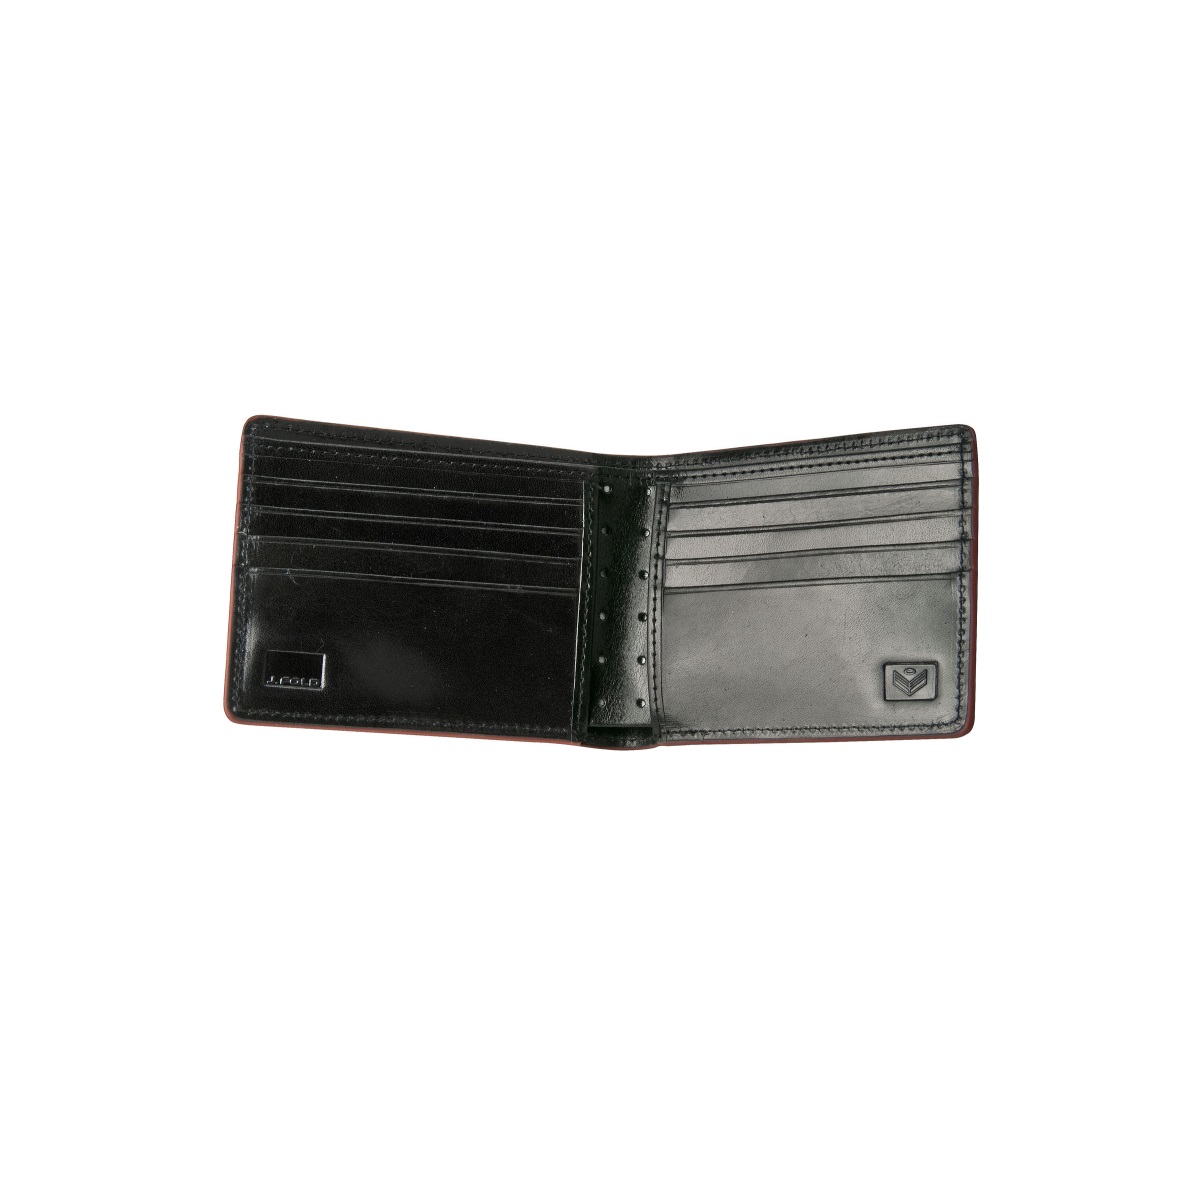 Mens Leather Wallets Bifold Black/Red